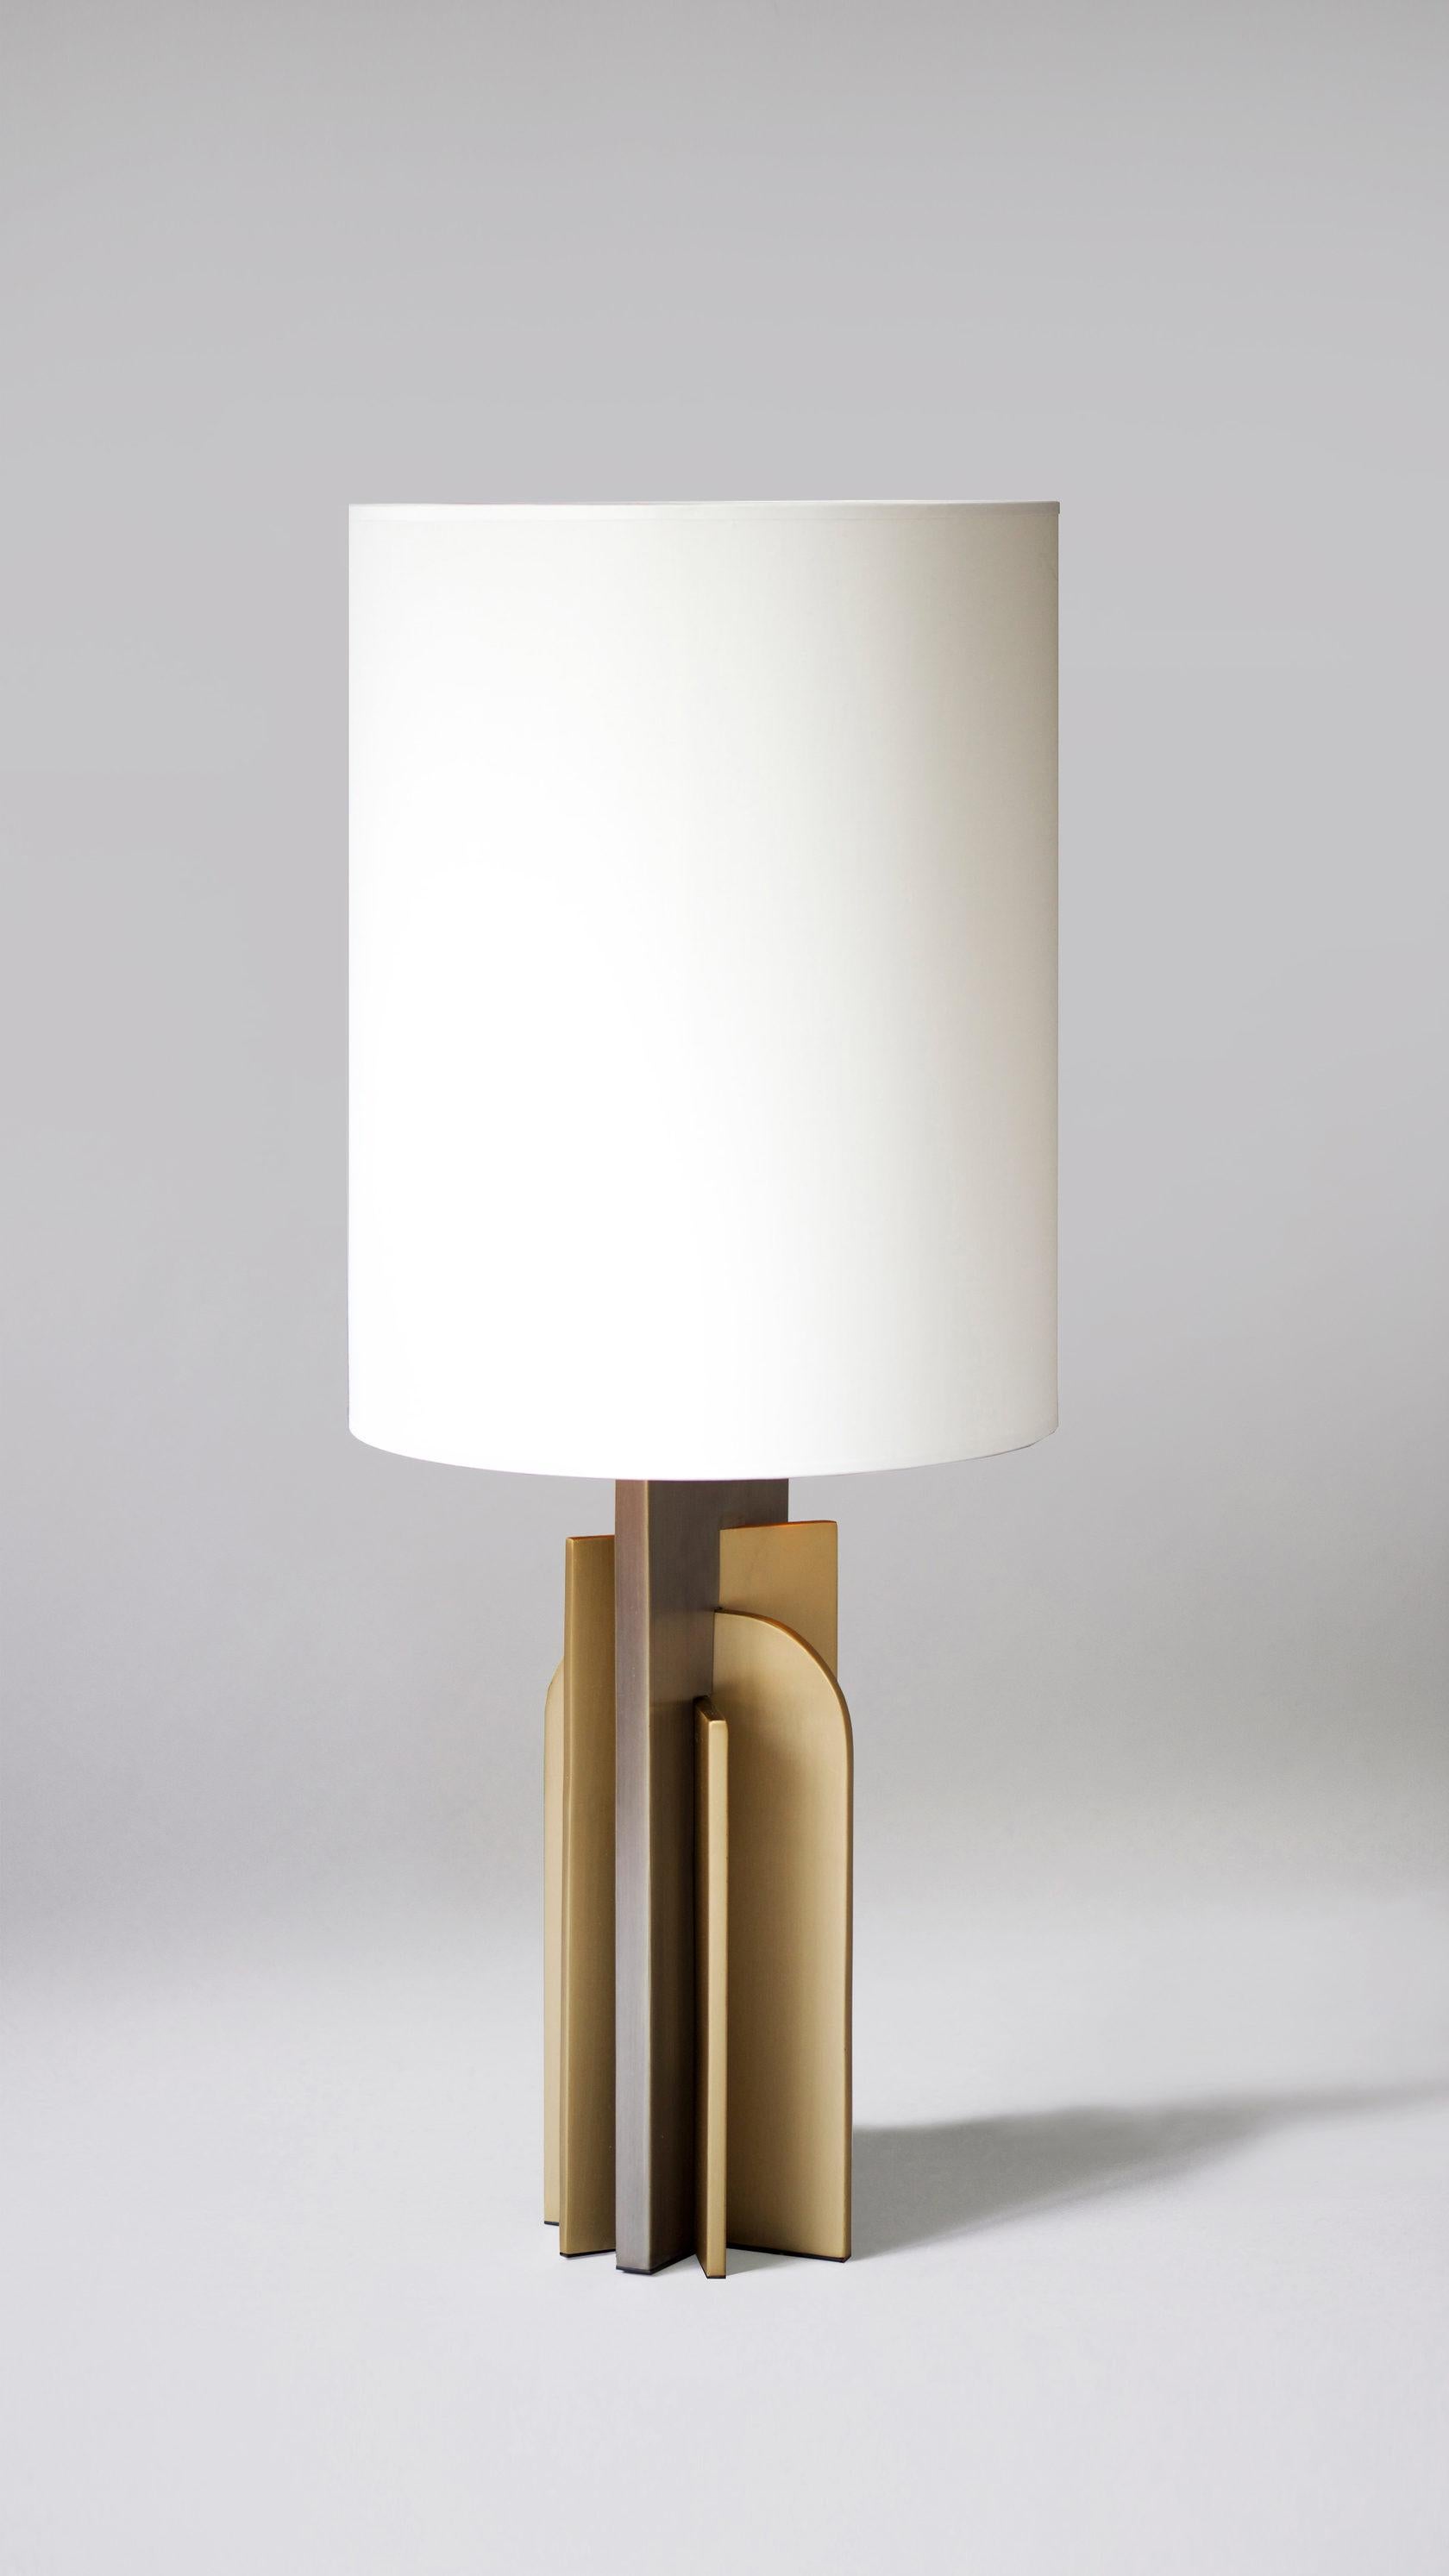 Set of 2 Brass Icon Table Lamps by Square in Circle
Dimensions: 17 W x 14 D x 90 H cm
Materials: Brushed brass finish, brushed dark, grey metal, white cotton shade with gold linning 

A modernist oversized table lamp. The base is crafted according